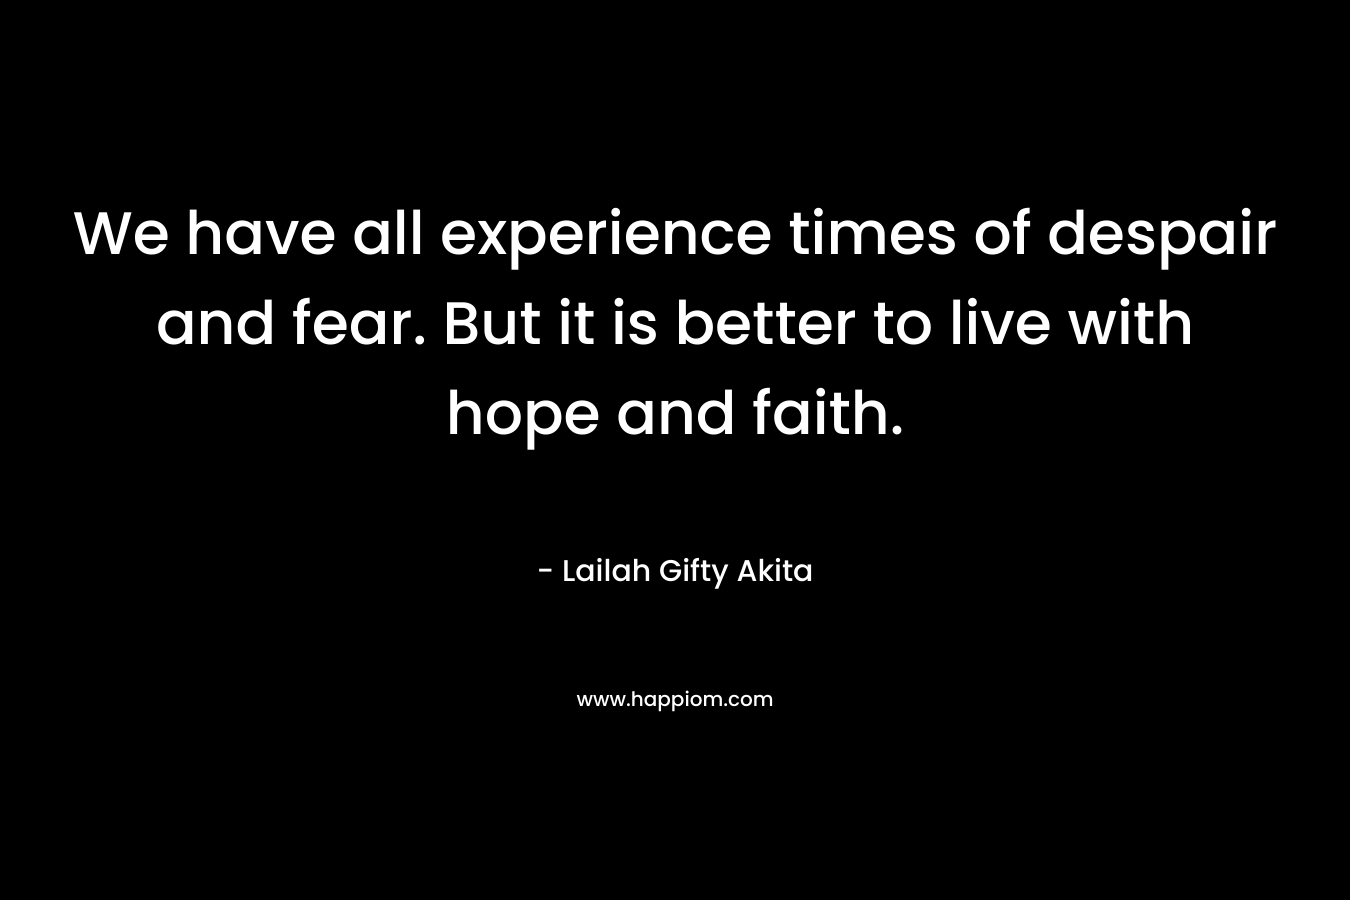 We have all experience times of despair and fear. But it is better to live with hope and faith.